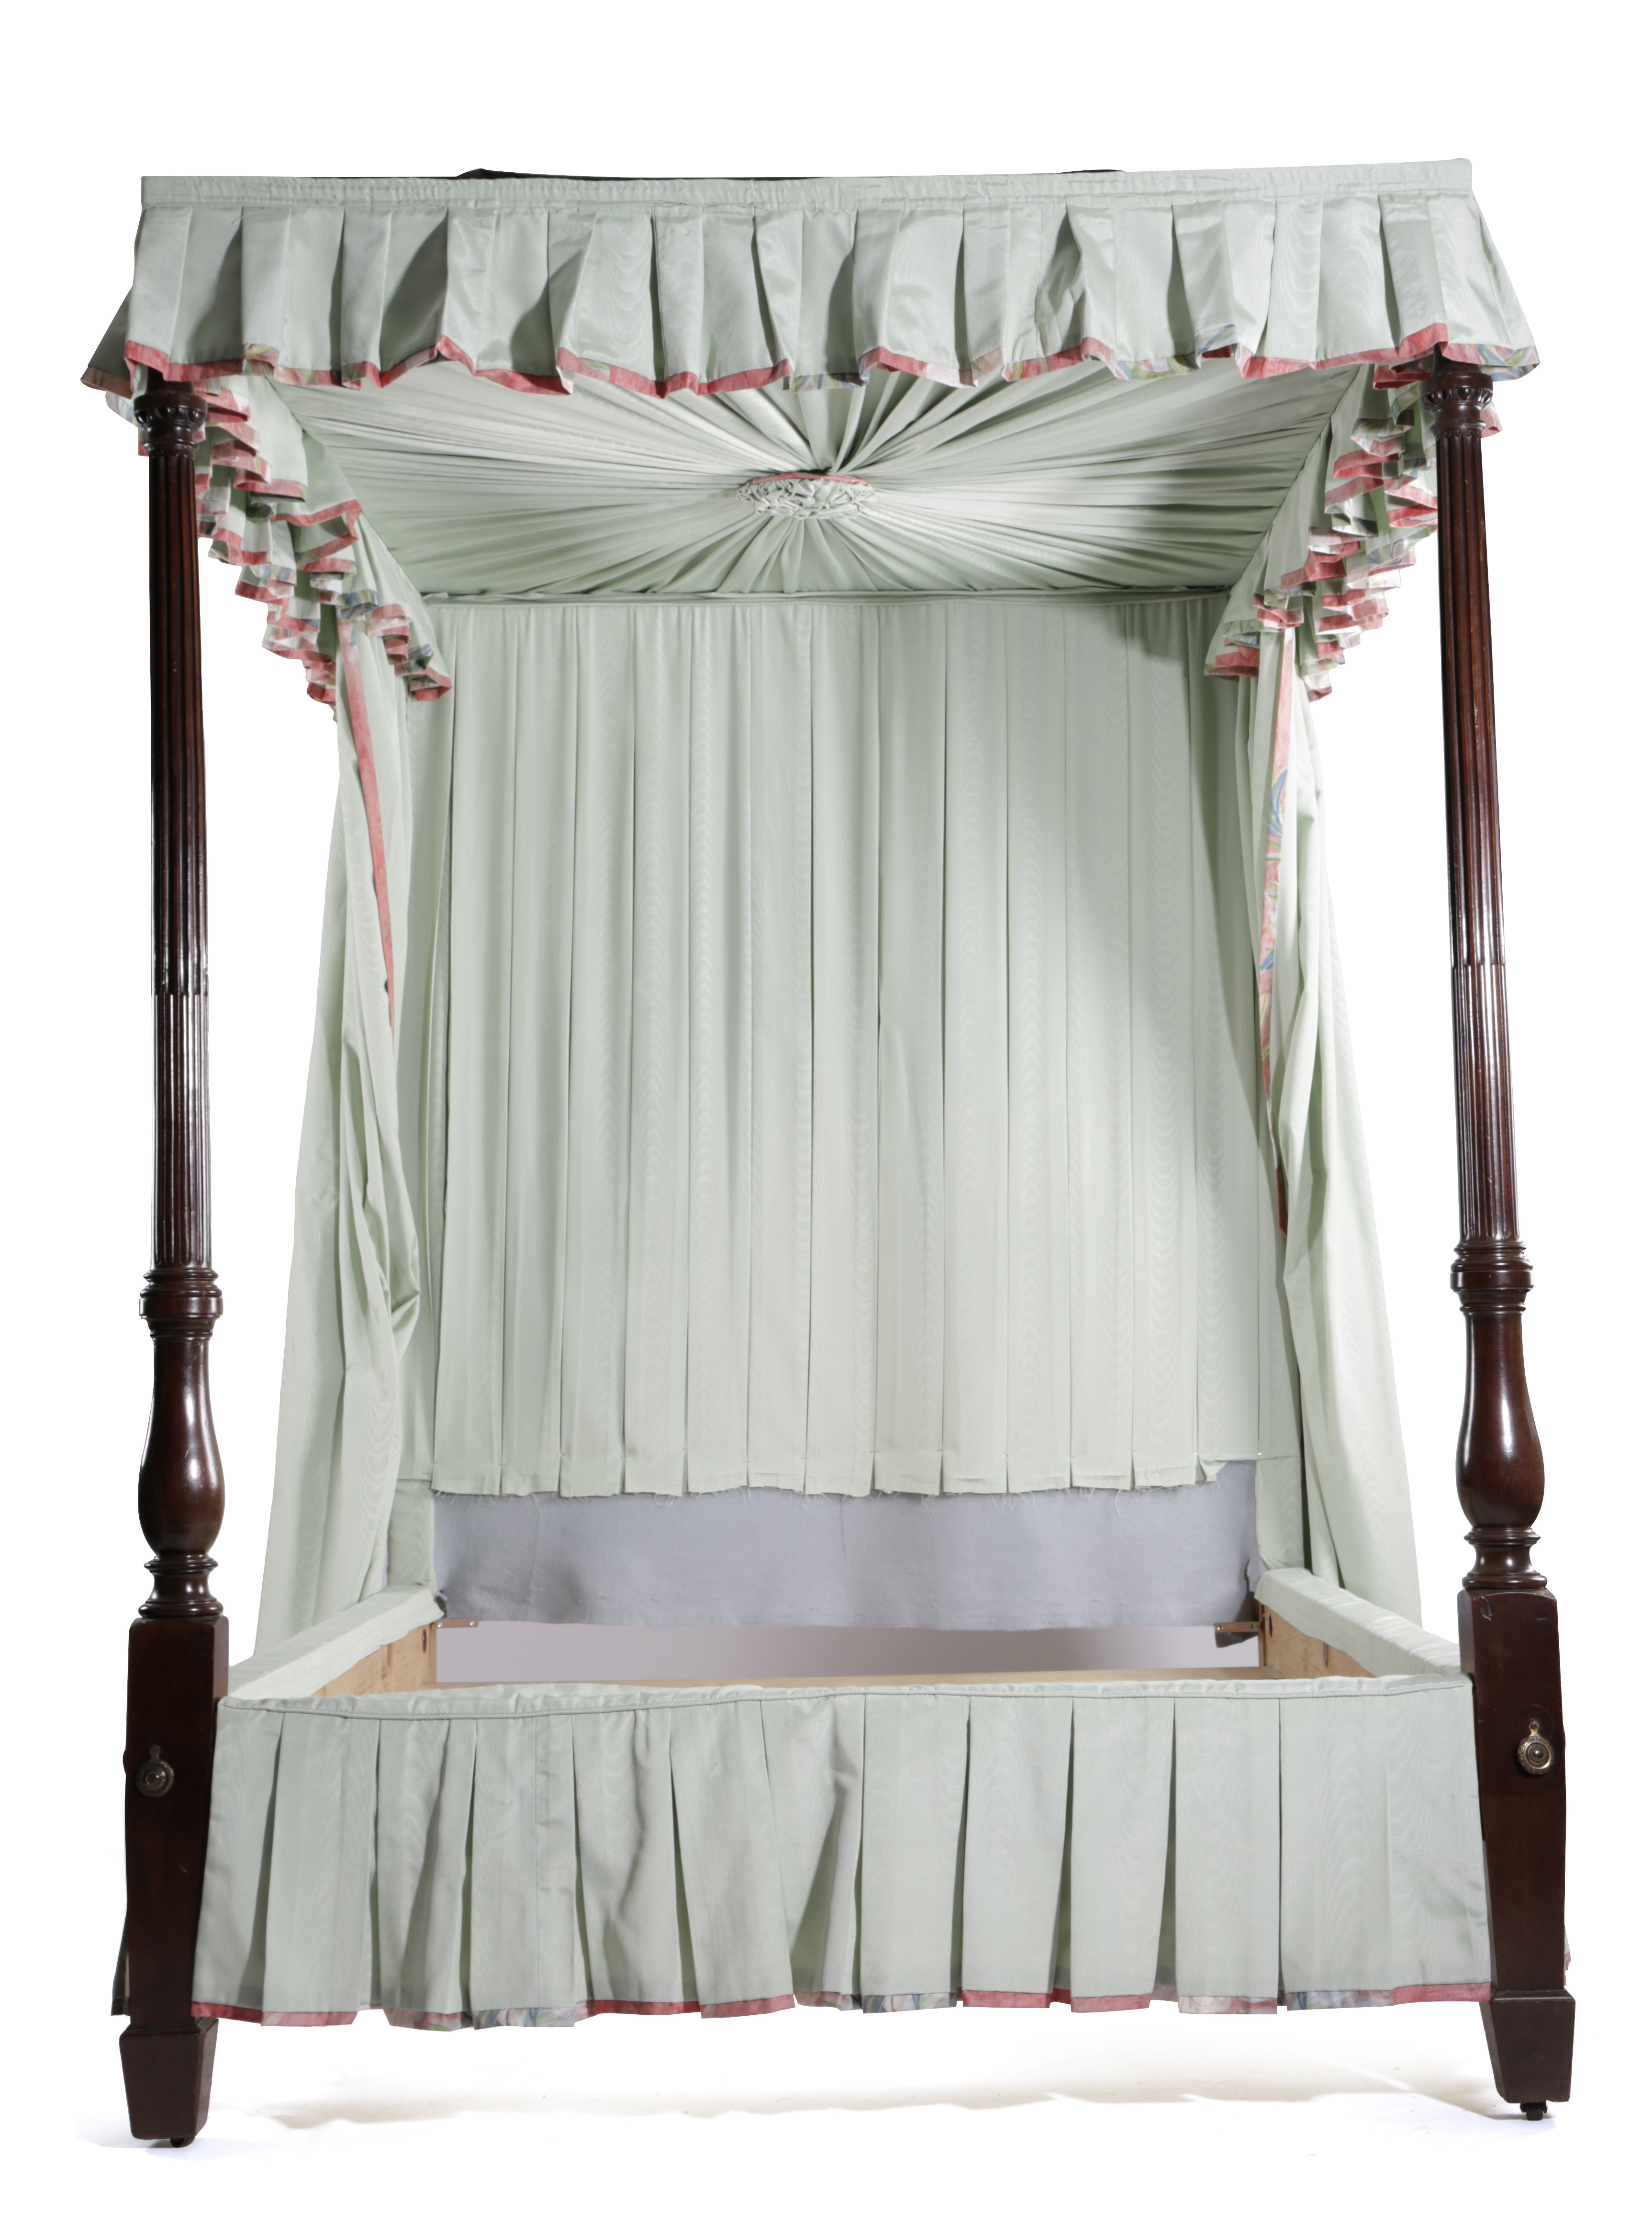 A MAHOGANY FOUR POSTER BED LATE 18TH CENTURY AND LATER with a pair of stop fluted and turned